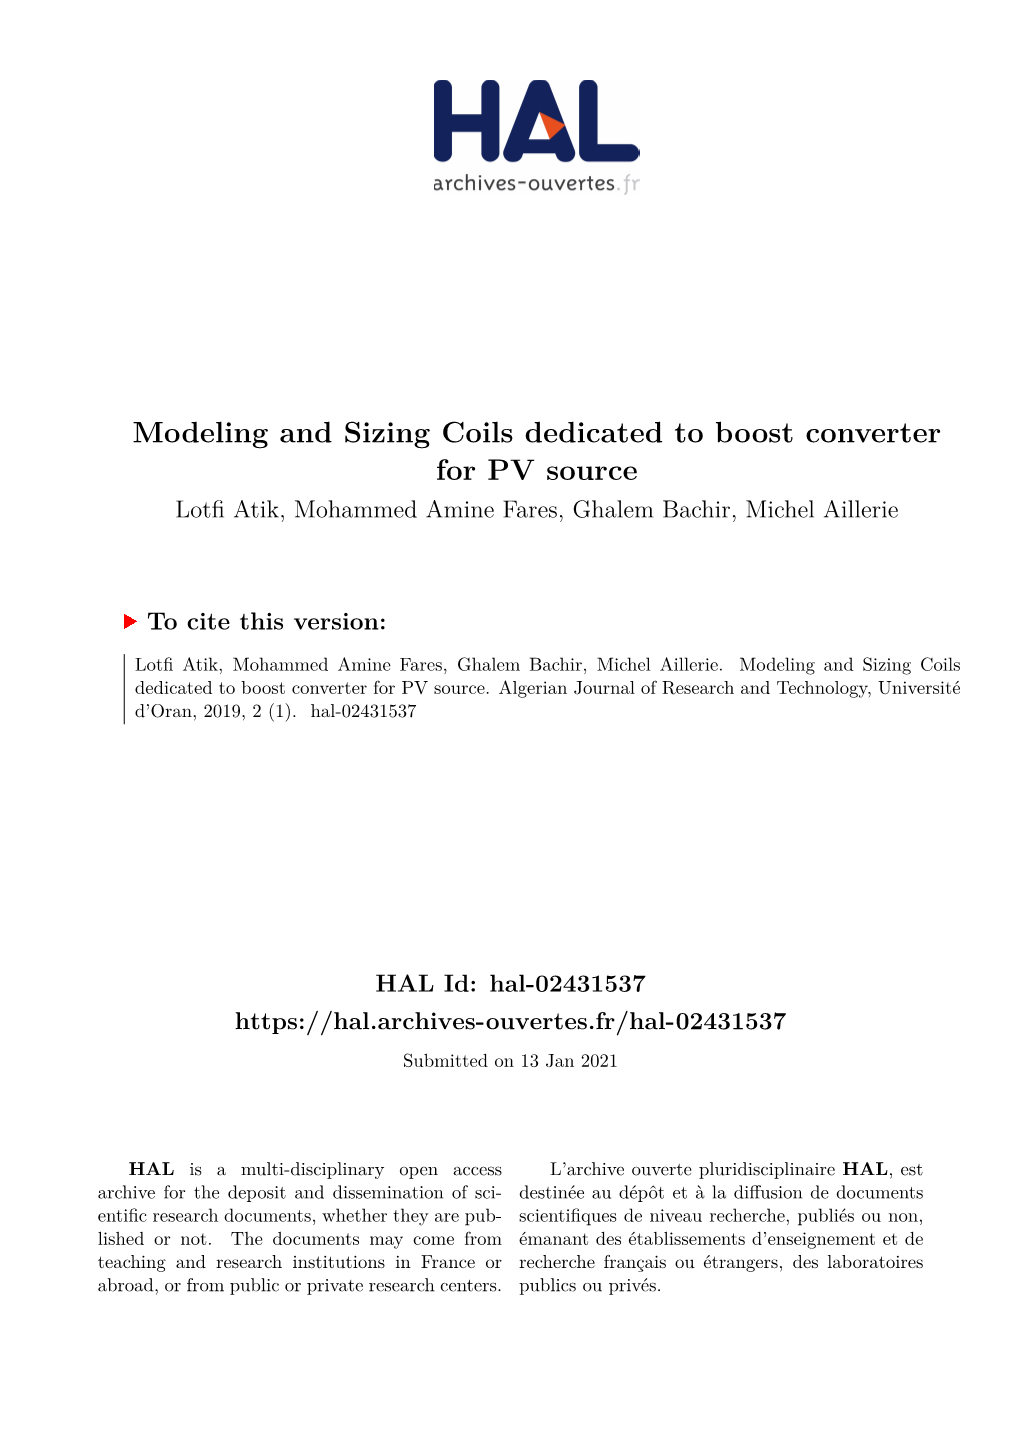 Modeling and Sizing Coils Dedicated to Boost Converter for PV Source Lotfi Atik, Mohammed Amine Fares, Ghalem Bachir, Michel Aillerie